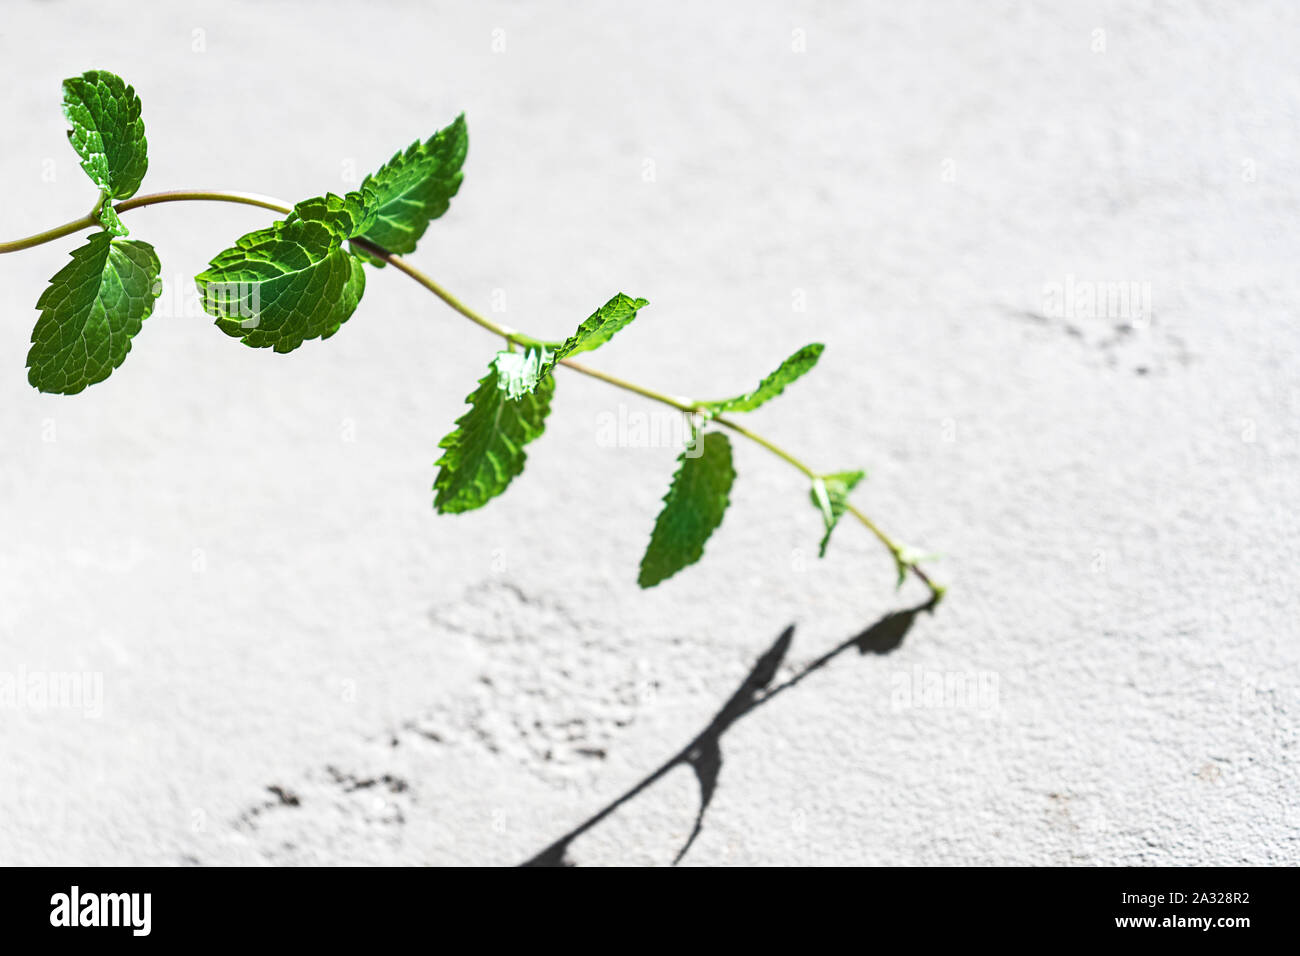 Fresh green mint or mentha leaves on gray color concrete background with shadow. Flat lay, top view. Close up of peppermint. Stock Photo